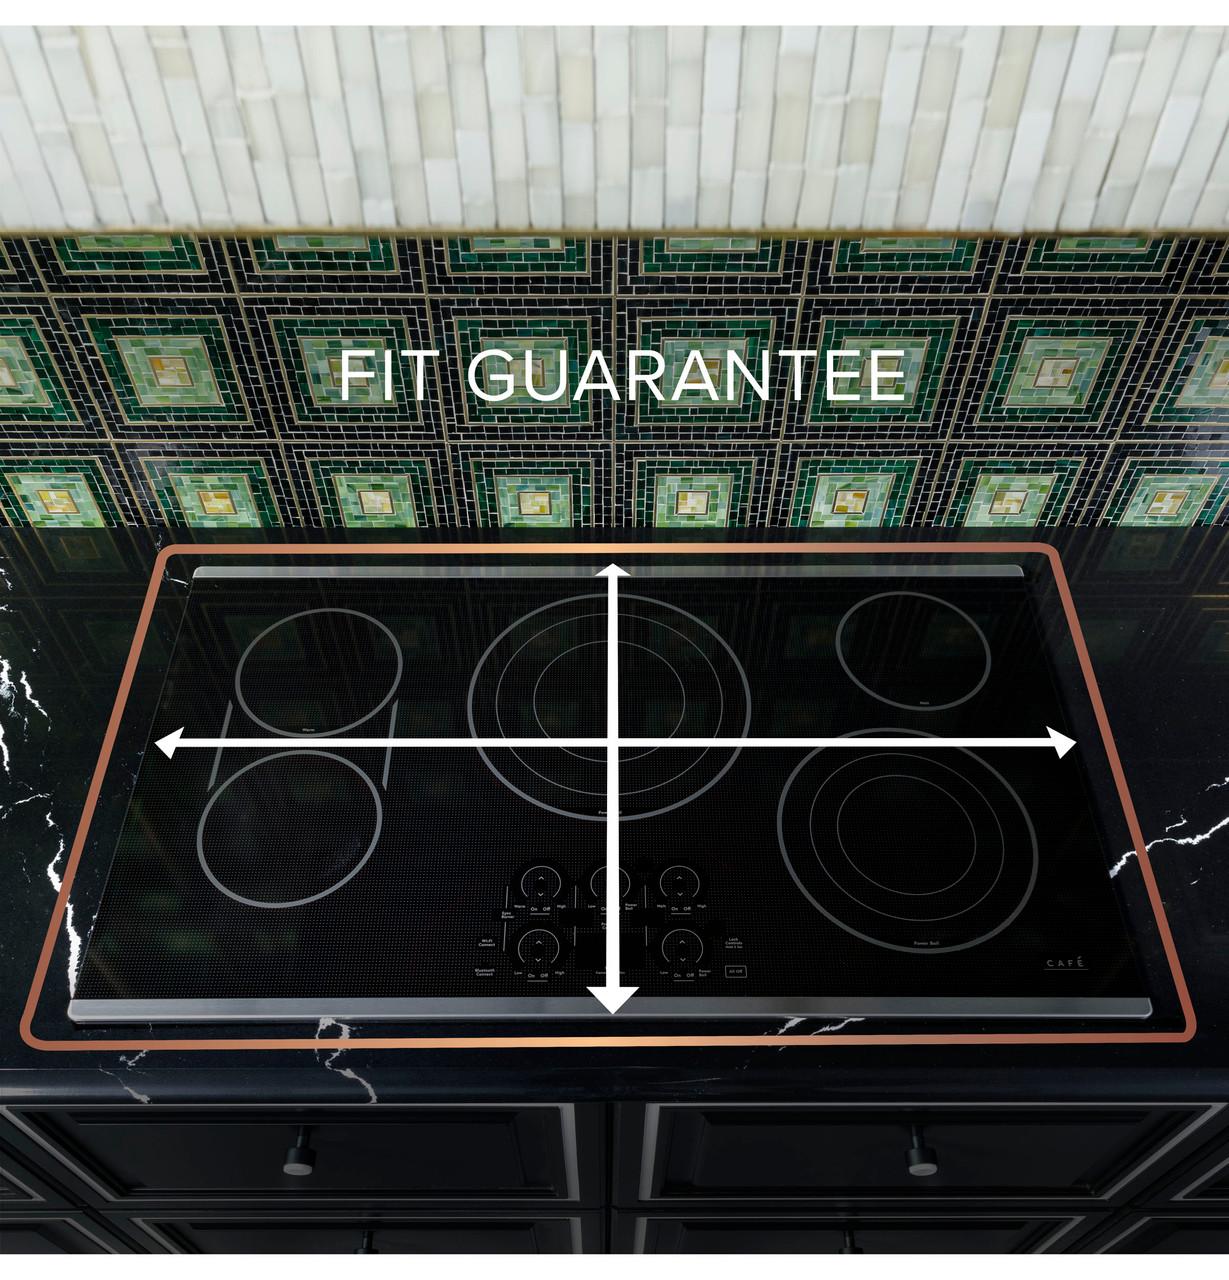 Cafe Caf(eback)™ 36" Touch-Control Electric Cooktop